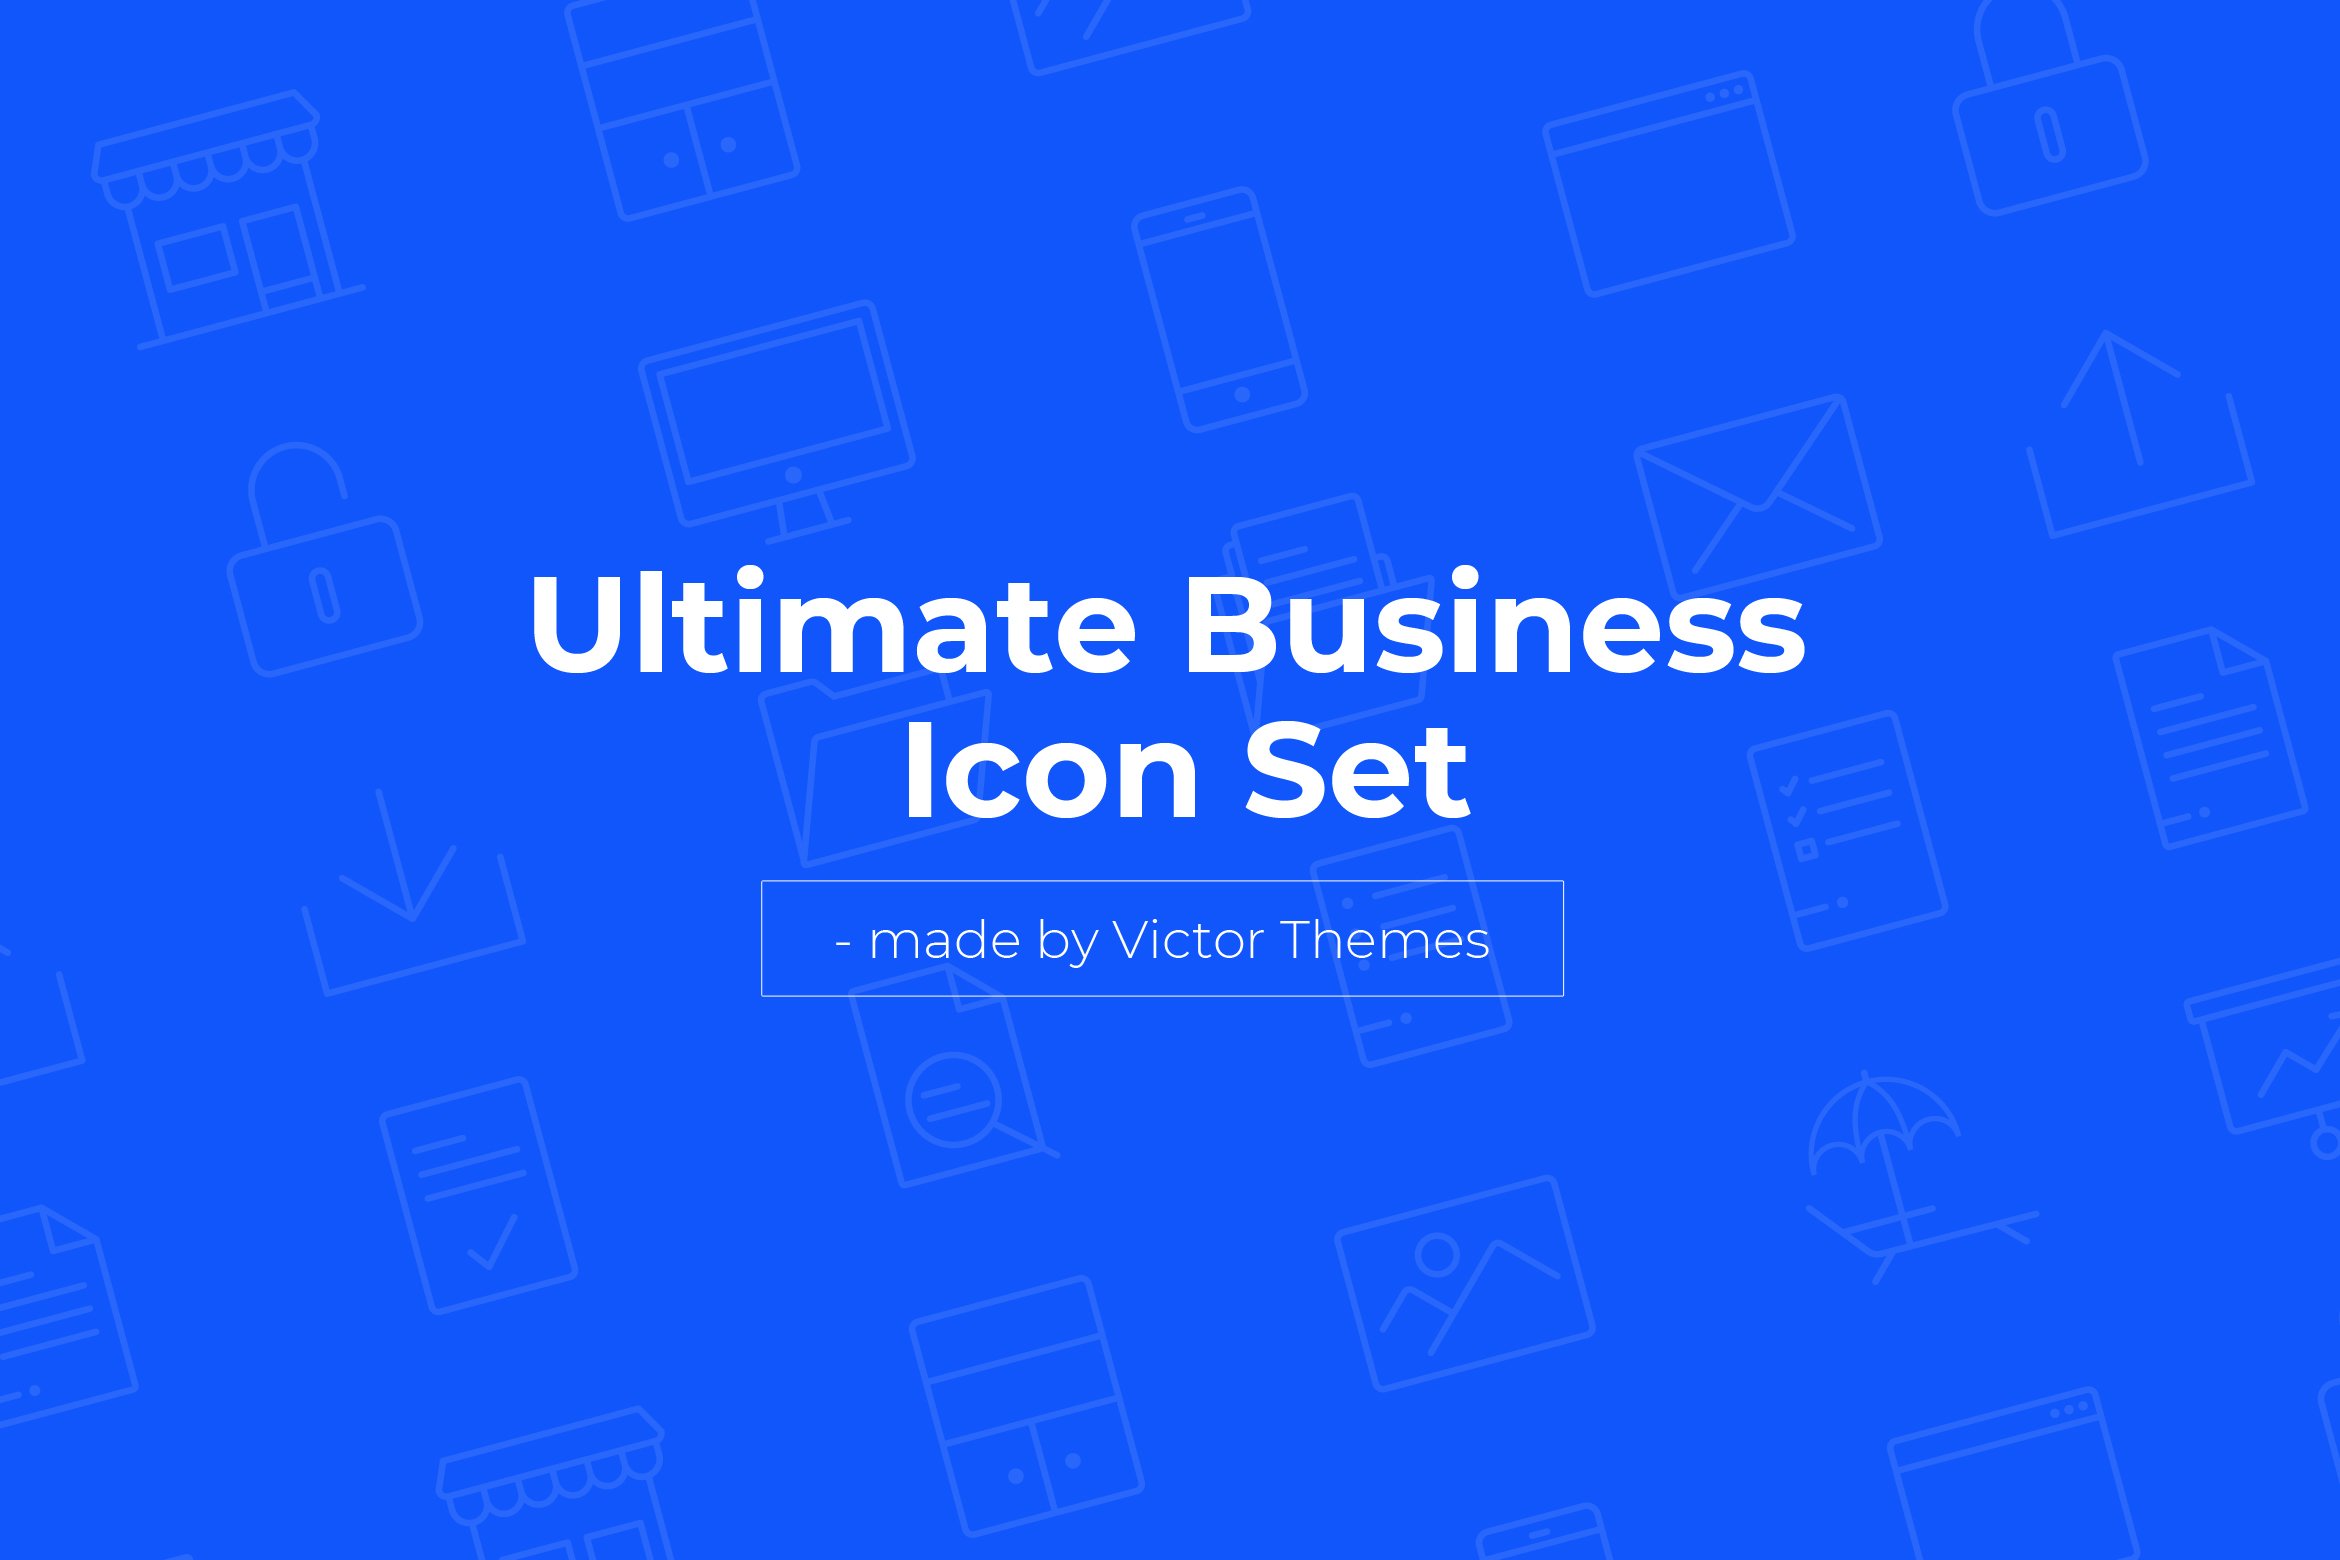 Ultimate Business Icon Set